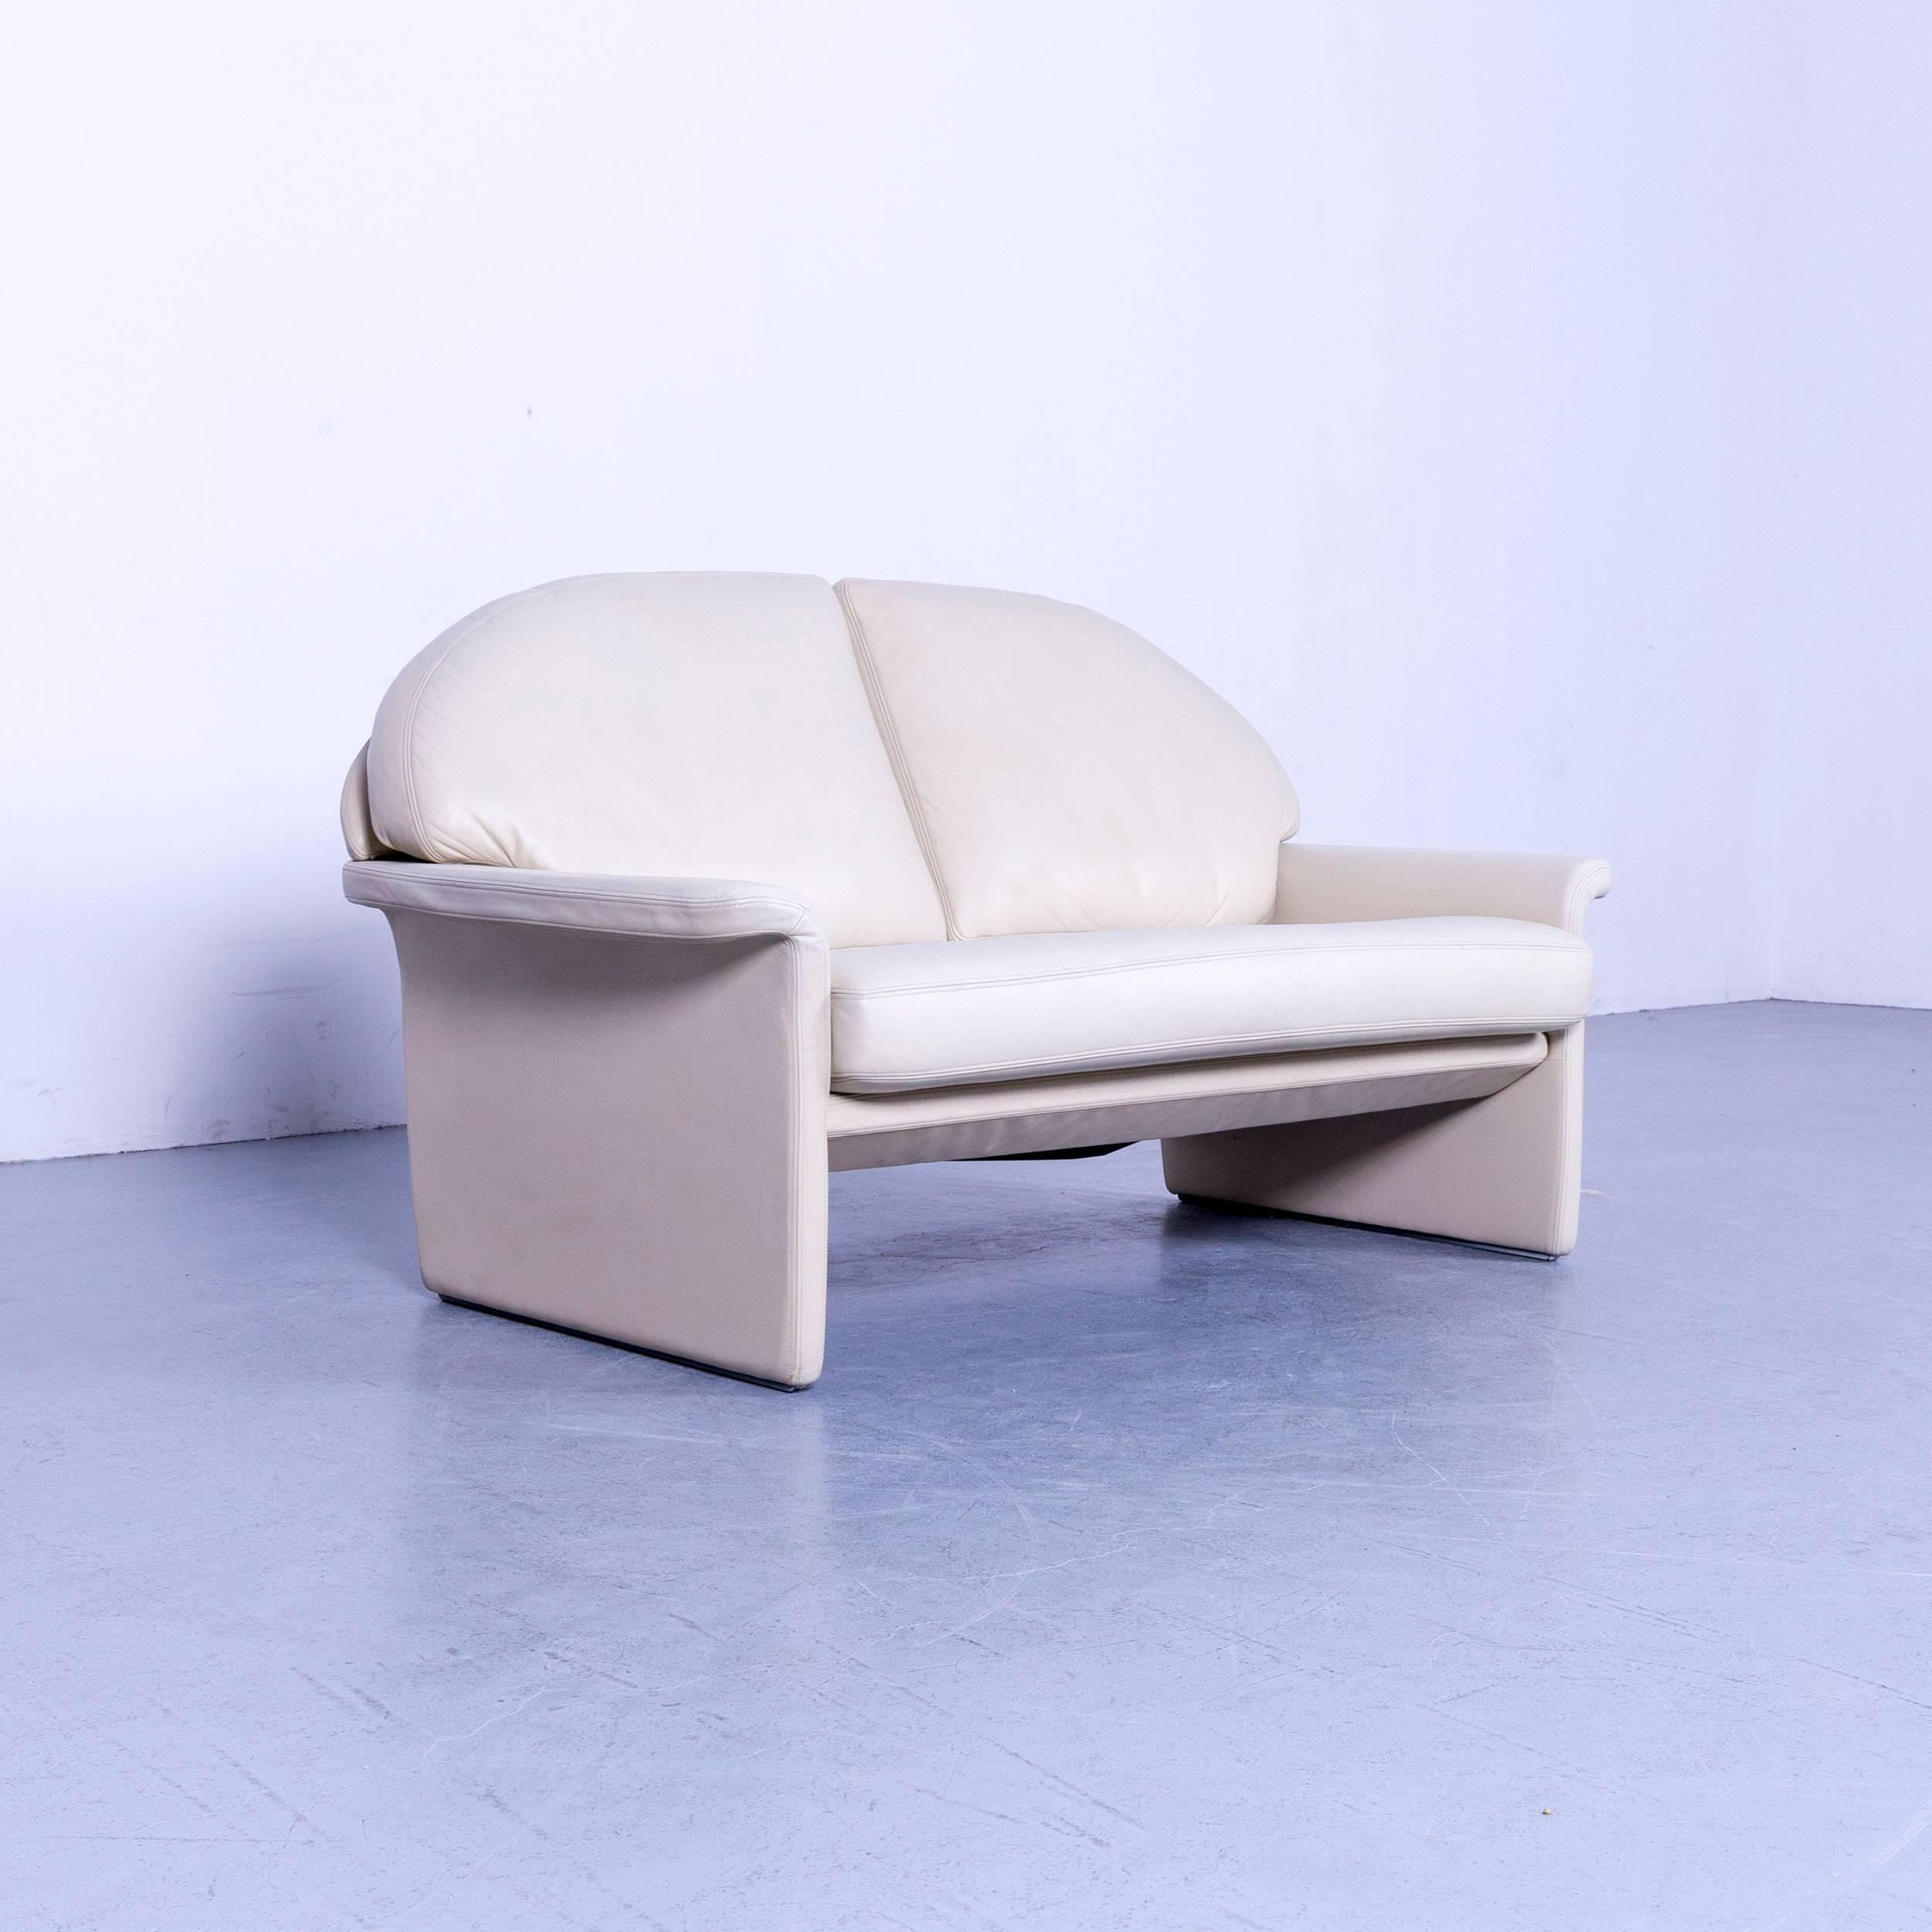 We offer delivery options to most destinations on earth. Find our shipping quotes at the bottom of this page in the shipping section.

We bring to you an De sede leather sofa off-white two-seat couch.

Shipping:

An on point shipping process is our